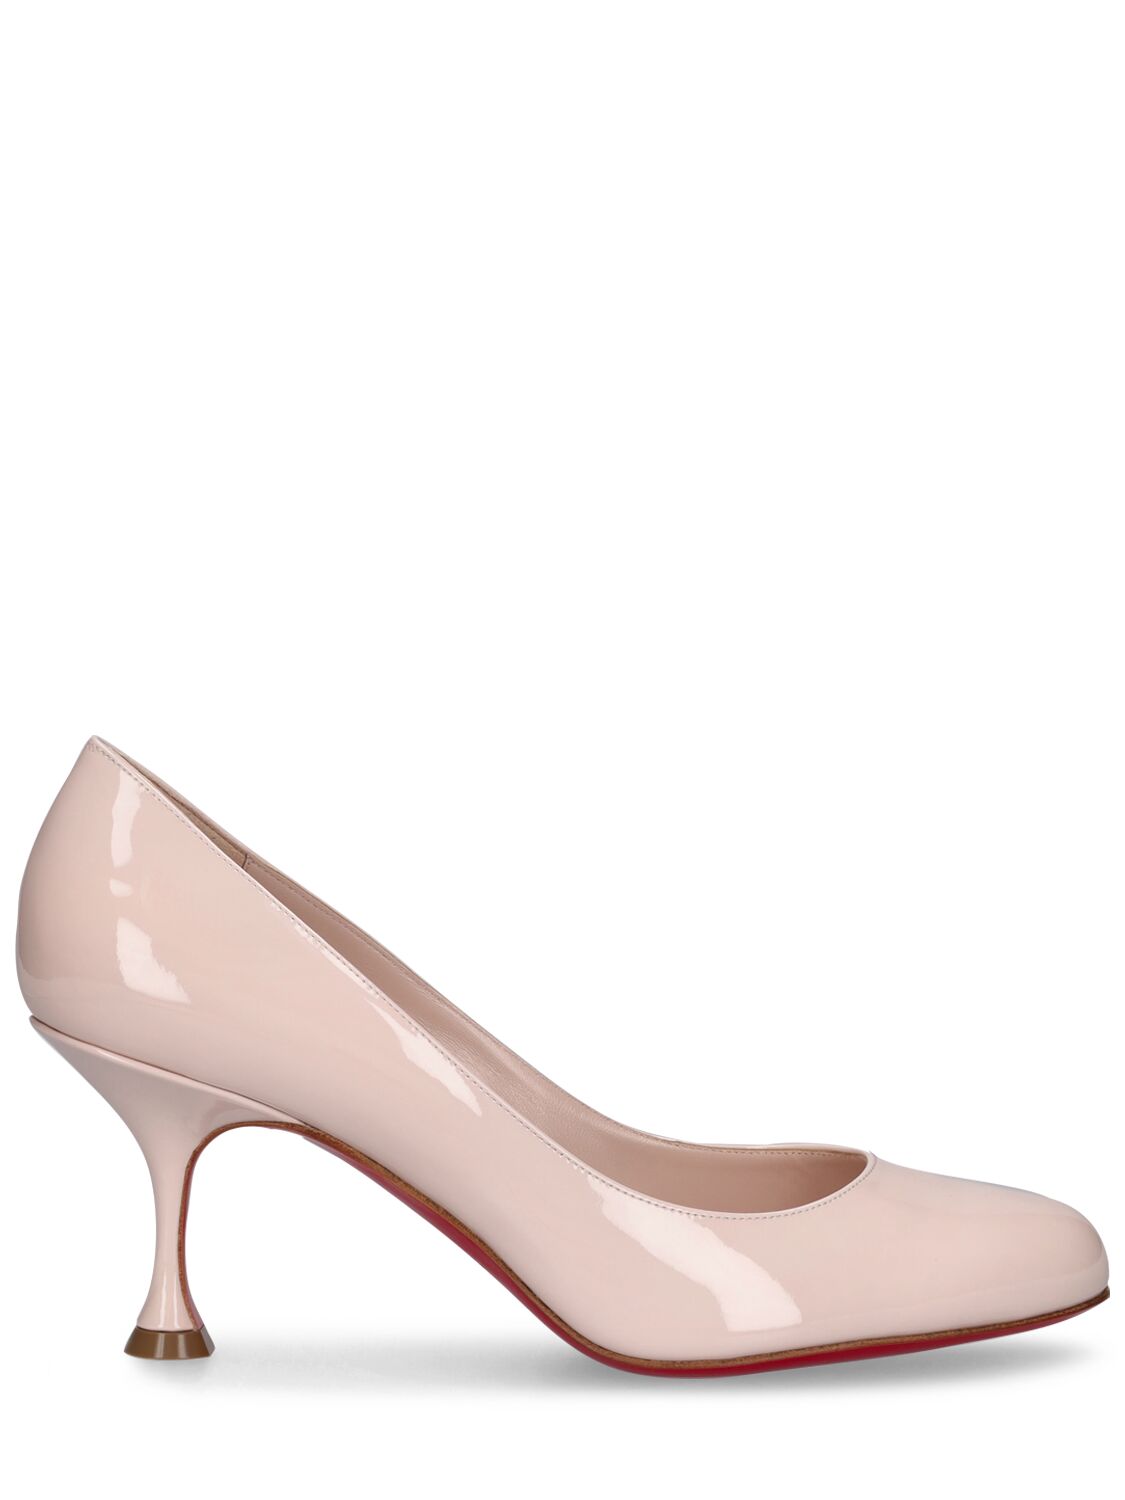 Christian Louboutin Stella Patent Red Sole Pumps In Off White